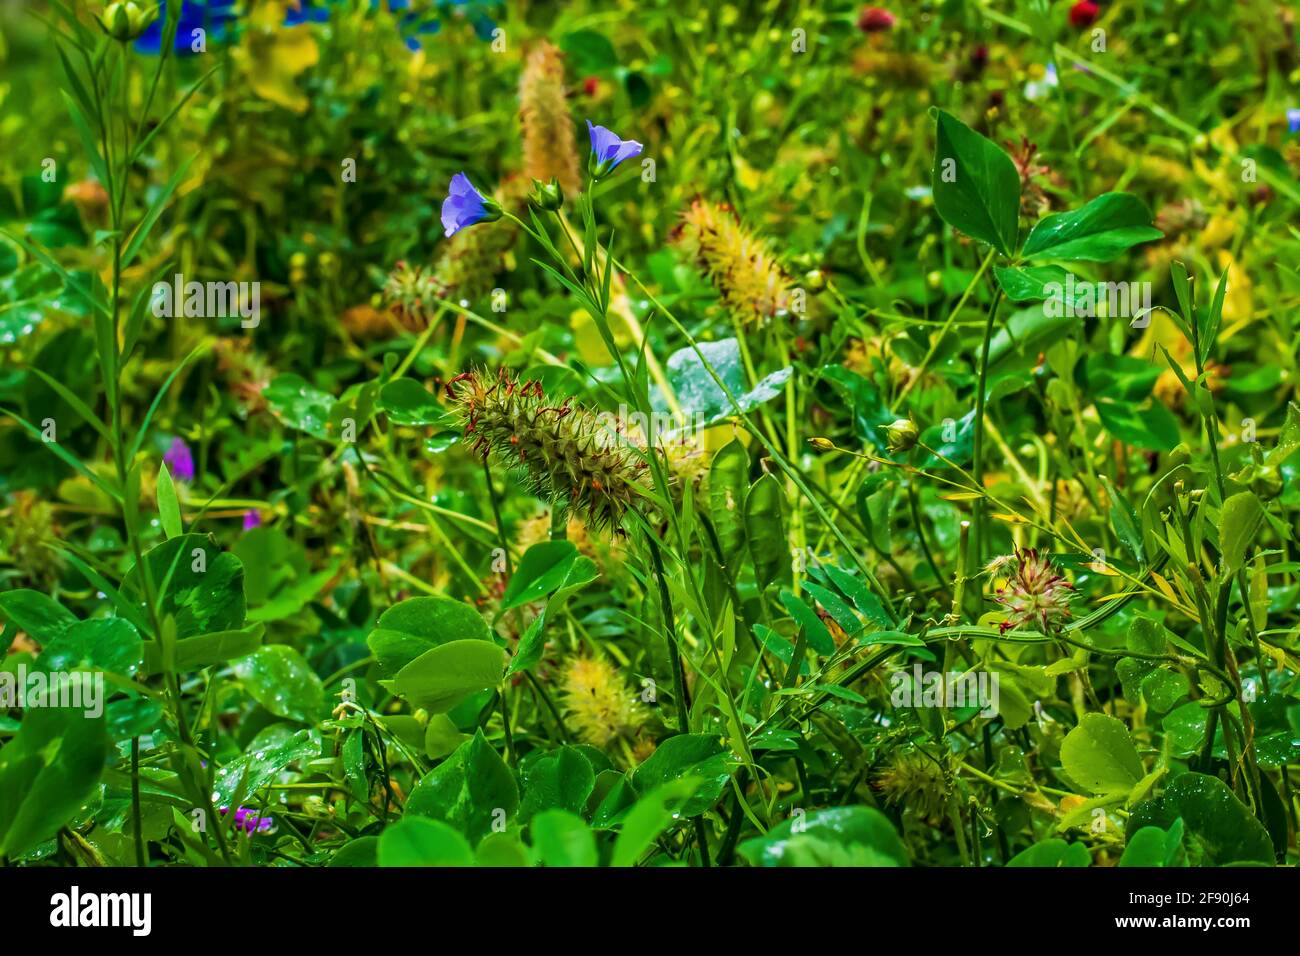 Wildflowers blooming in the garden Stock Photo